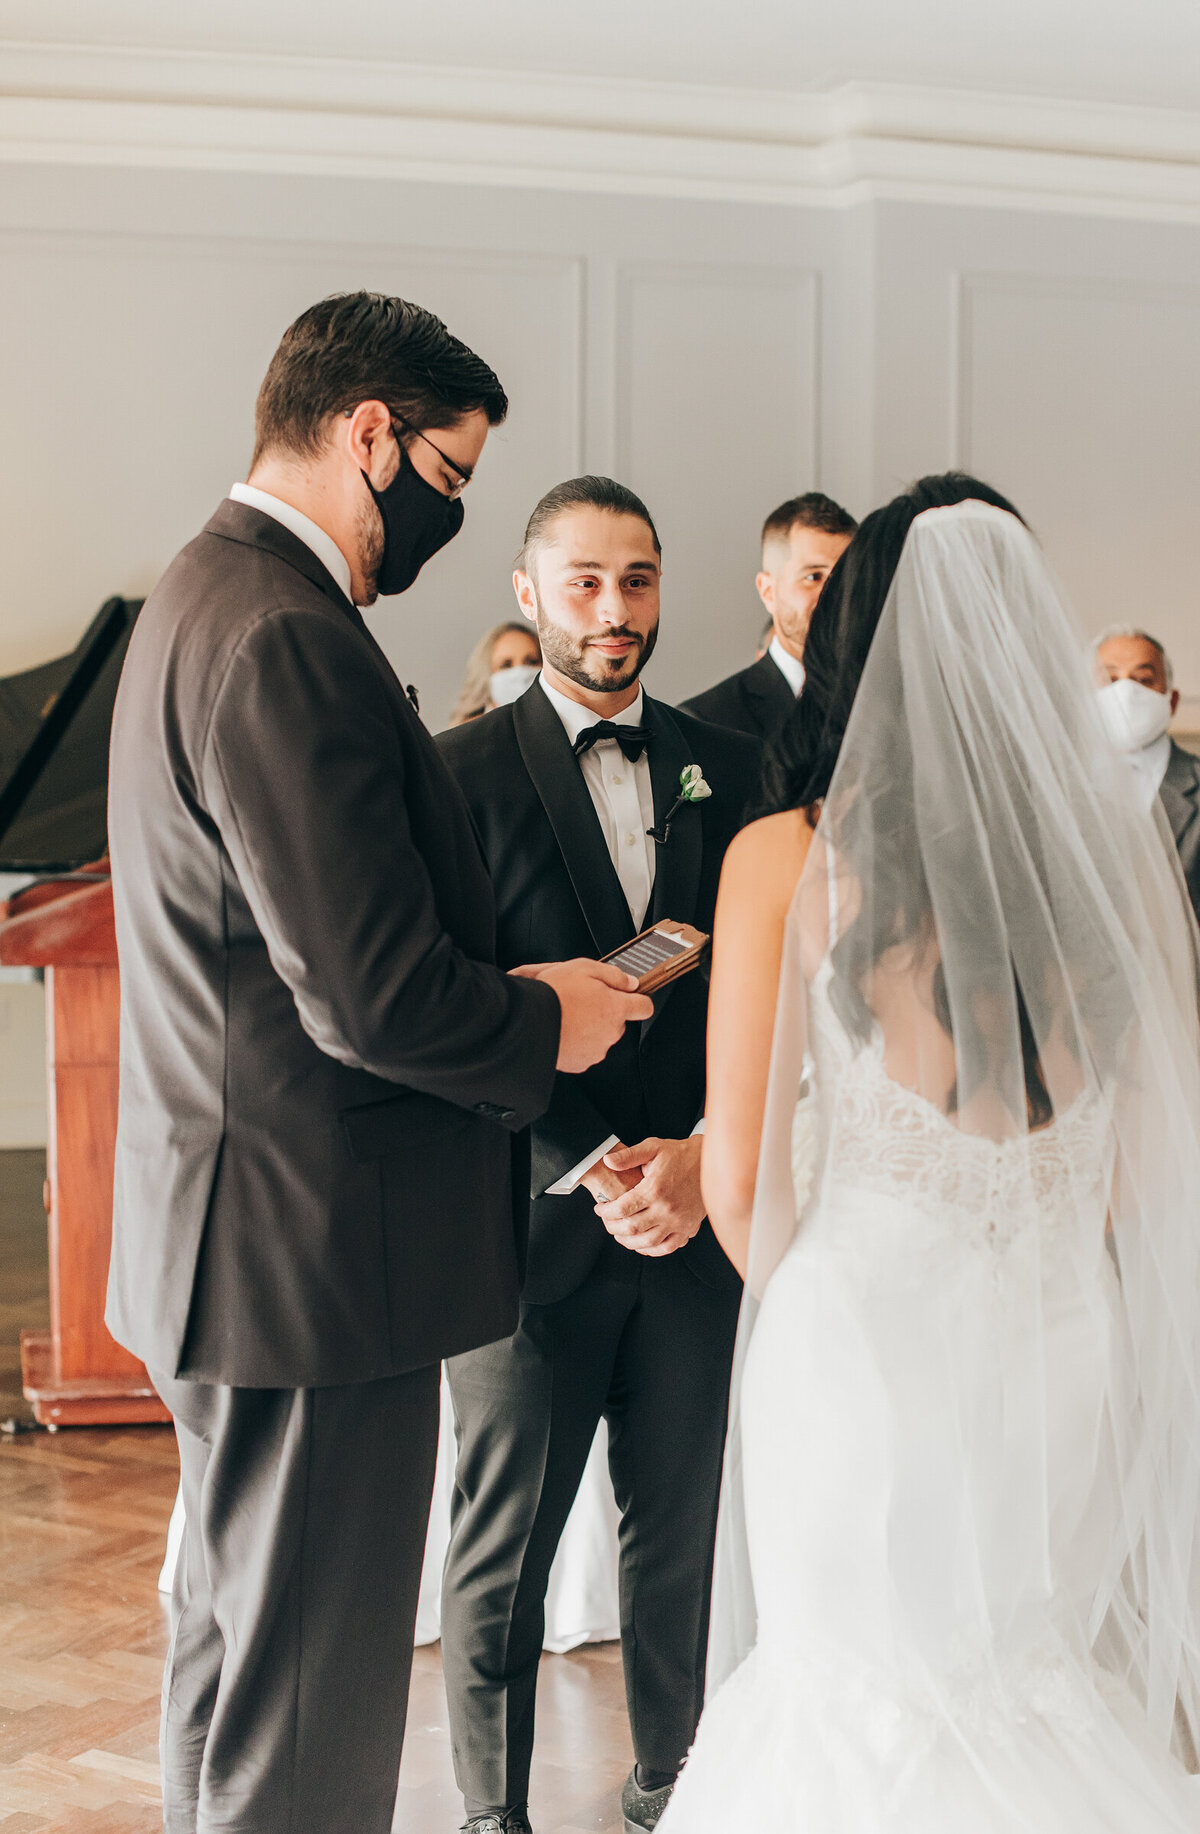 Bride and groom saying their vows during their black tie wedding ceremony